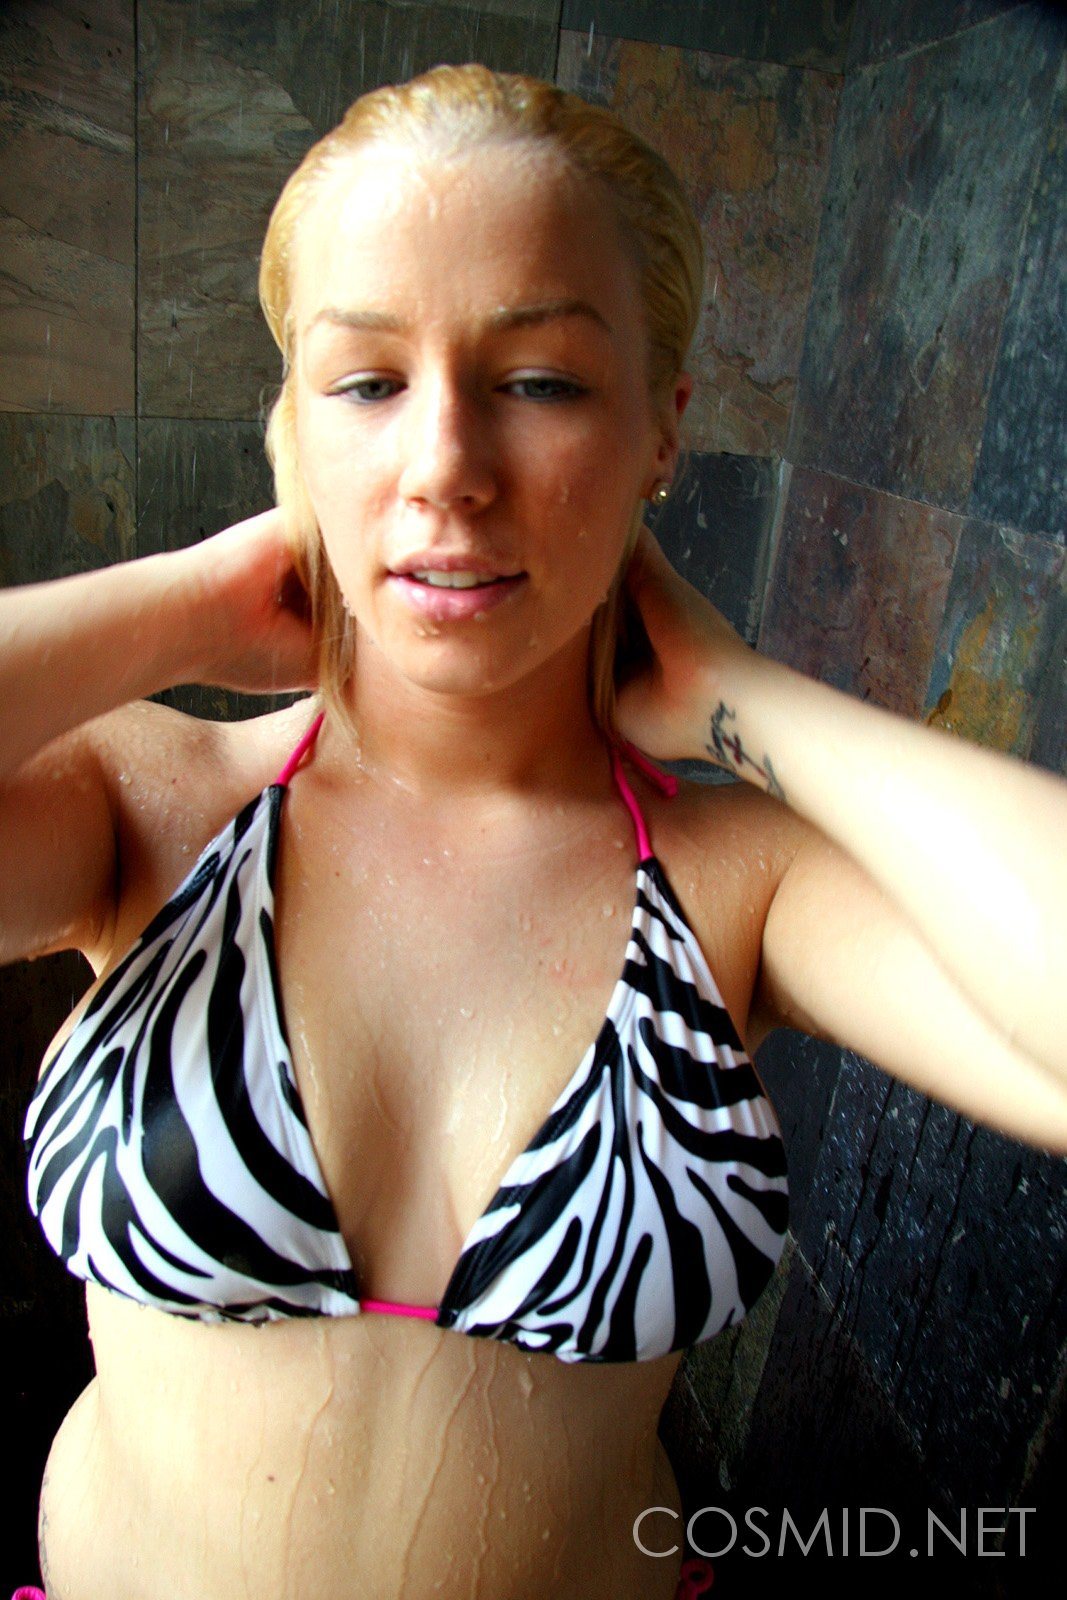 wpid-curvy-blonde-cosmid-amateur-leeann-teasing-with-her-big-tits-in-the-shower8.jpg